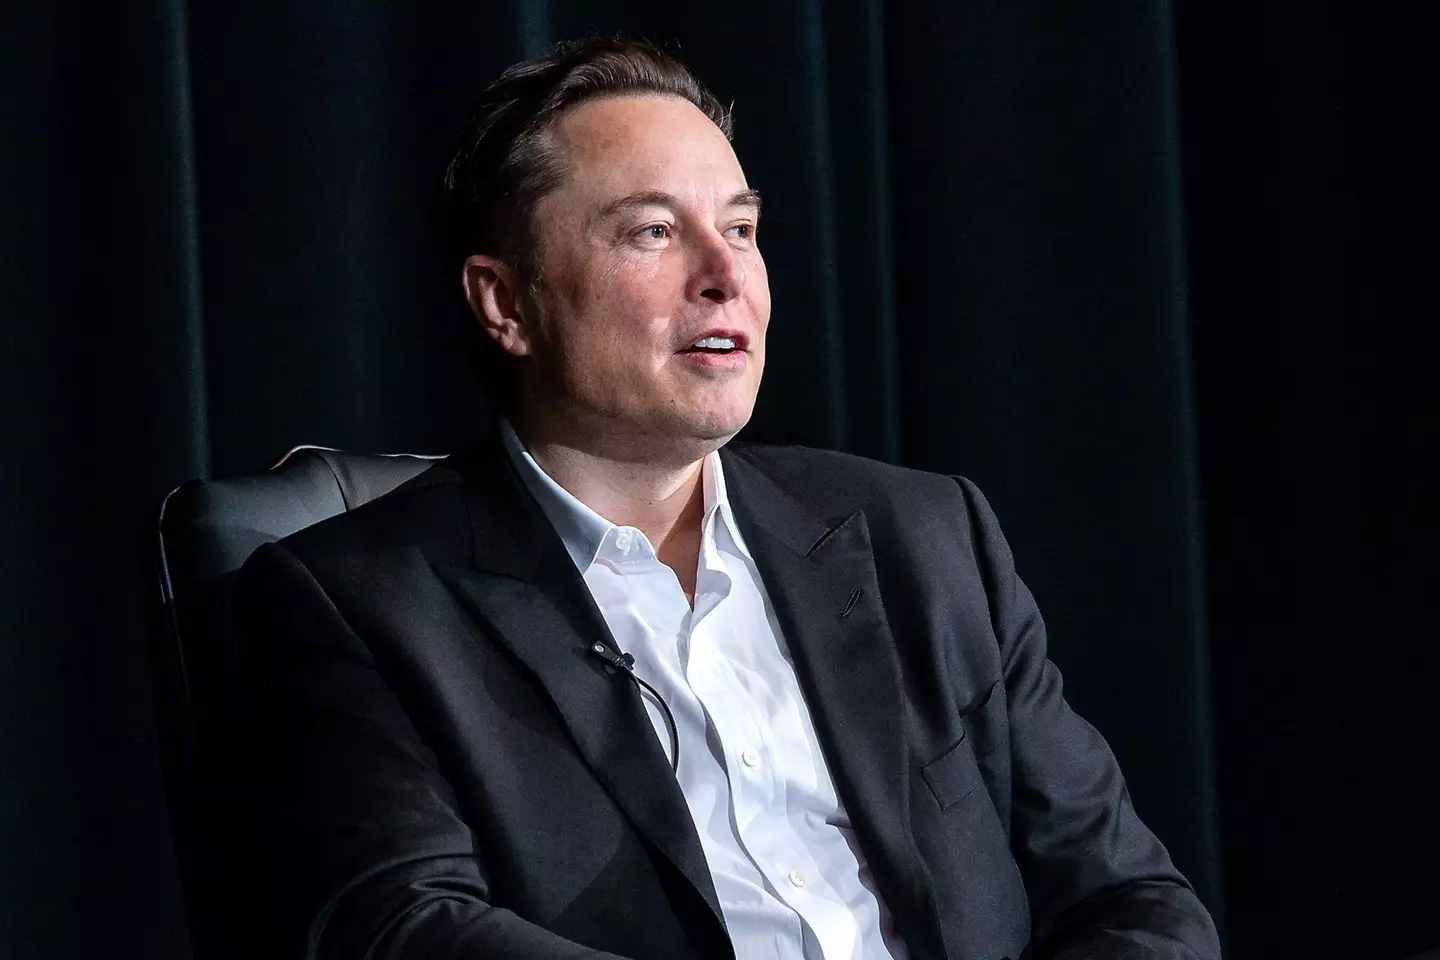 Elon Musk told his staff not to be 'bothered' by the stock market.